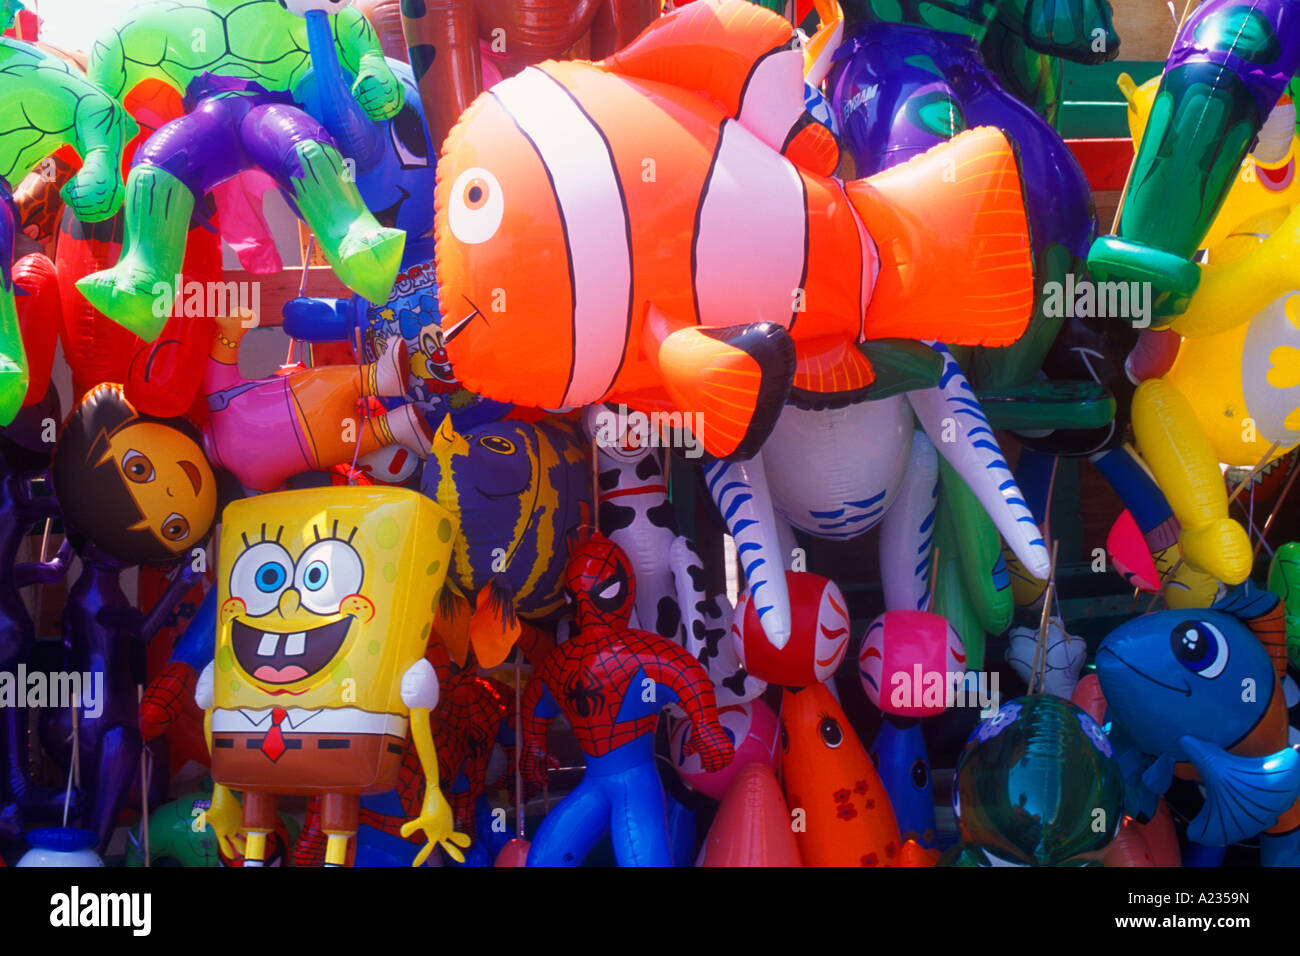 Toy balloons for sale at Coney Island Amusement Park fair grounds multiple toy balloons spongebob squarepants yellow balloon and orange fish balloon Stock Photo